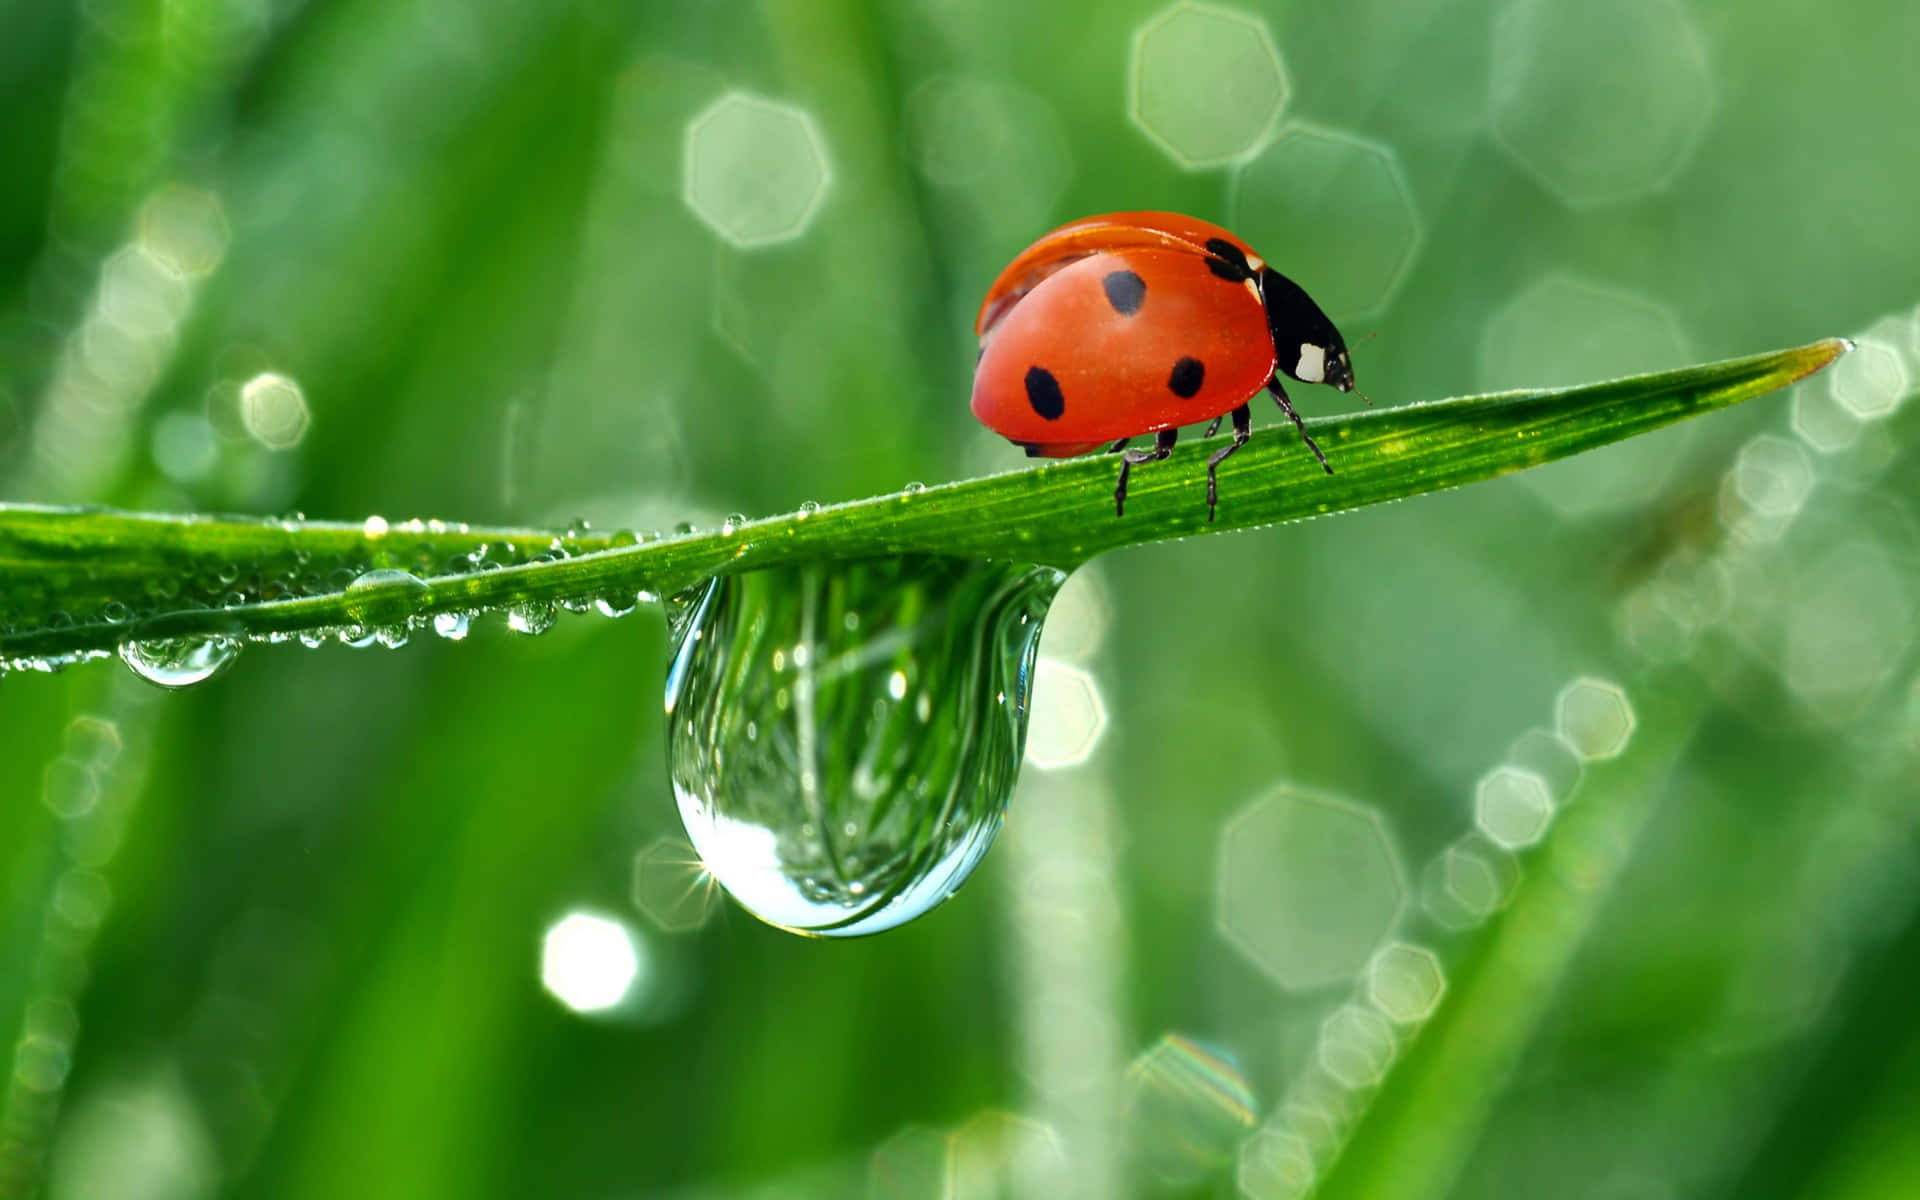 Ladybug On A Leaf With Water Droplets Wallpaper